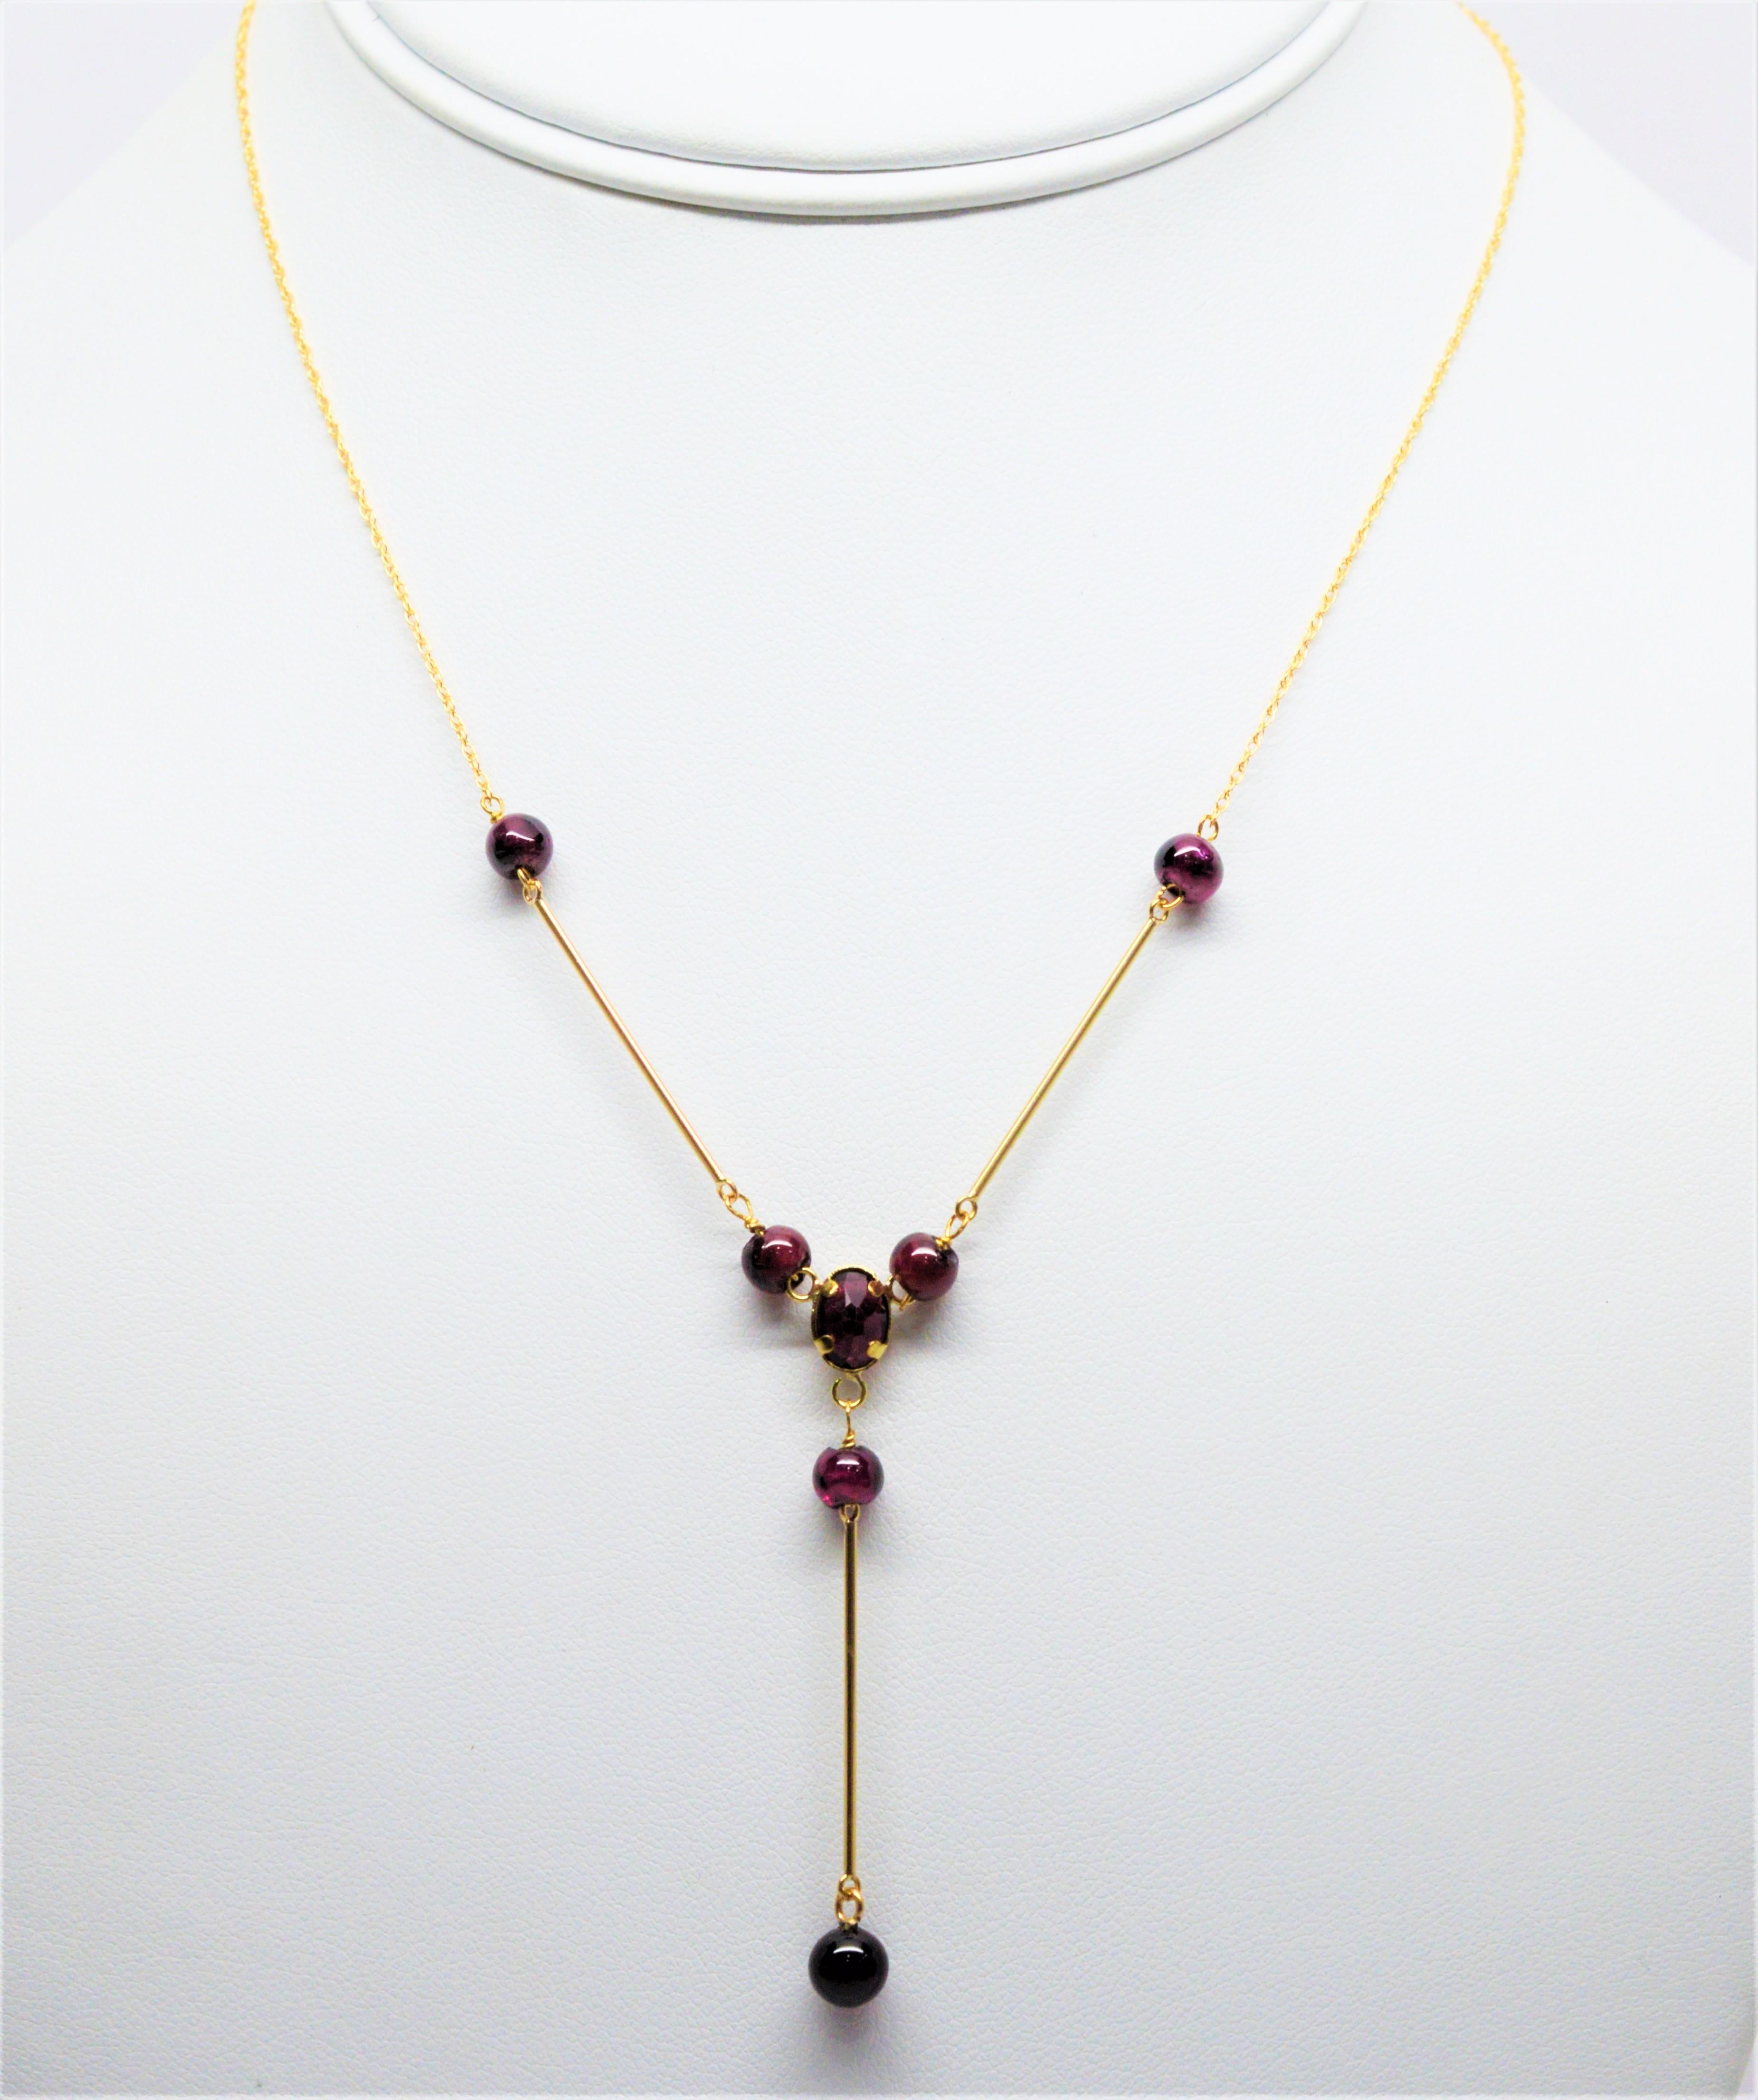 Flirty and fun with a vintage style twist.  Rich red polished round garnet beads and a center facet-cut garnet before the drop. With fourteen karat yellow gold bar links and chain, this feminine style Y necklace measures sixteen inches plus the two